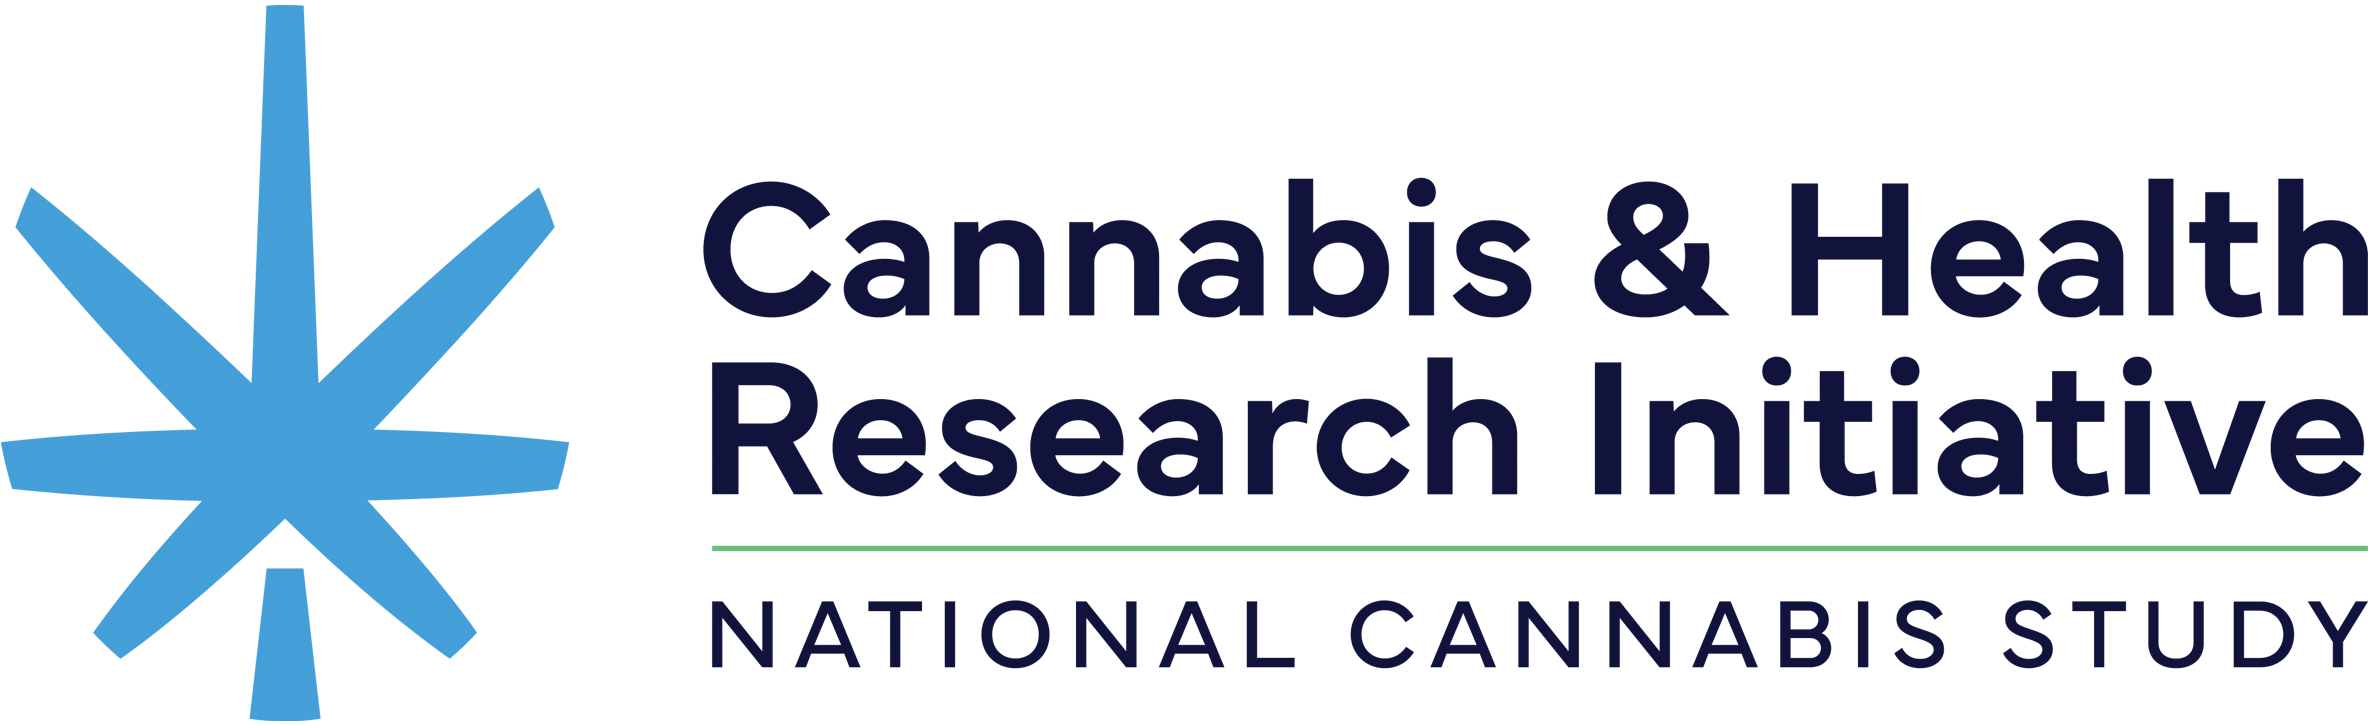 Cannabis and Health Research Initiative